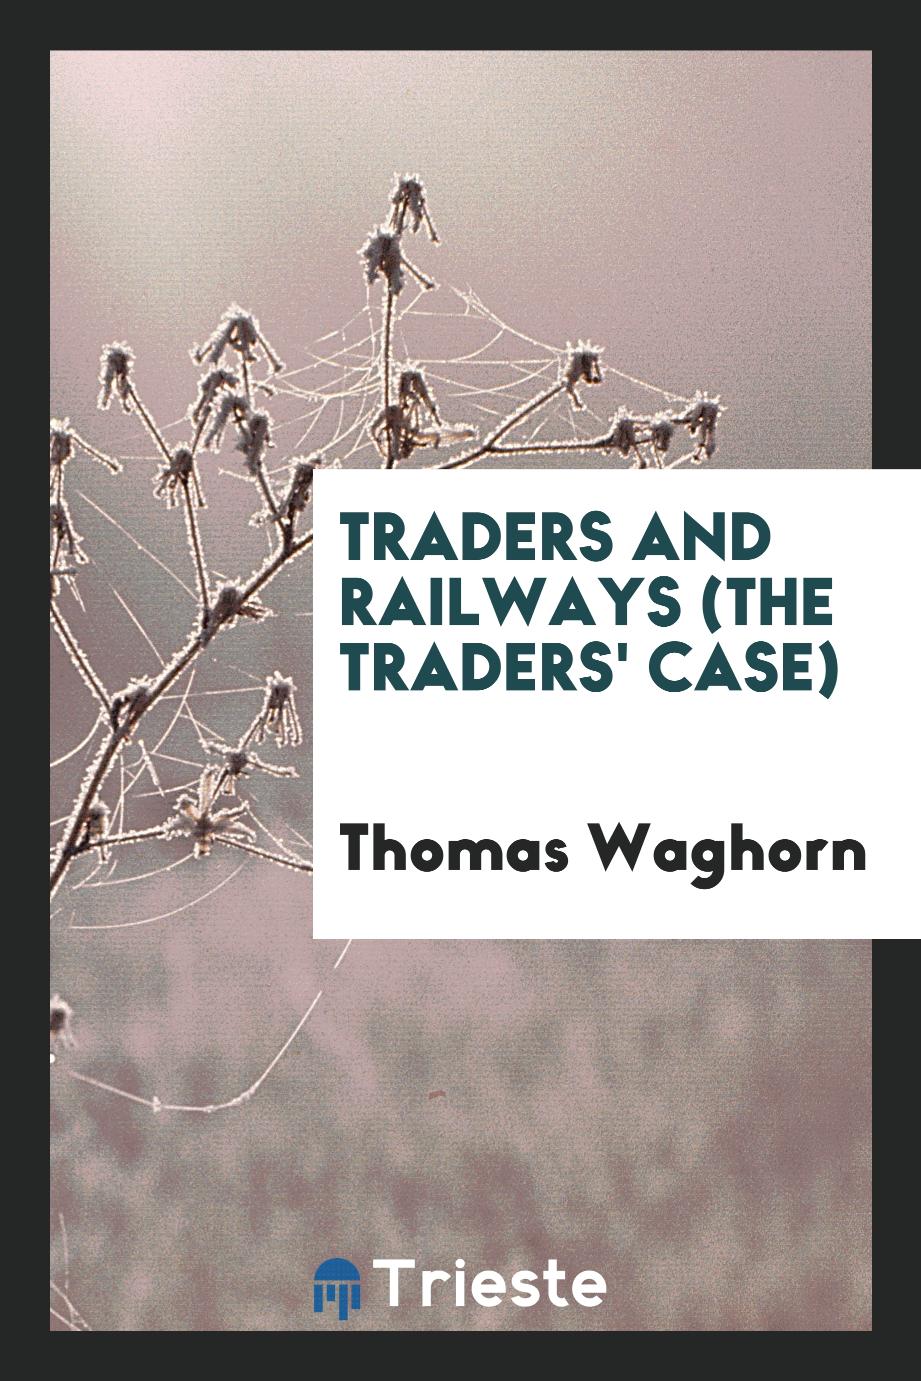 Traders and railways (the traders' case)